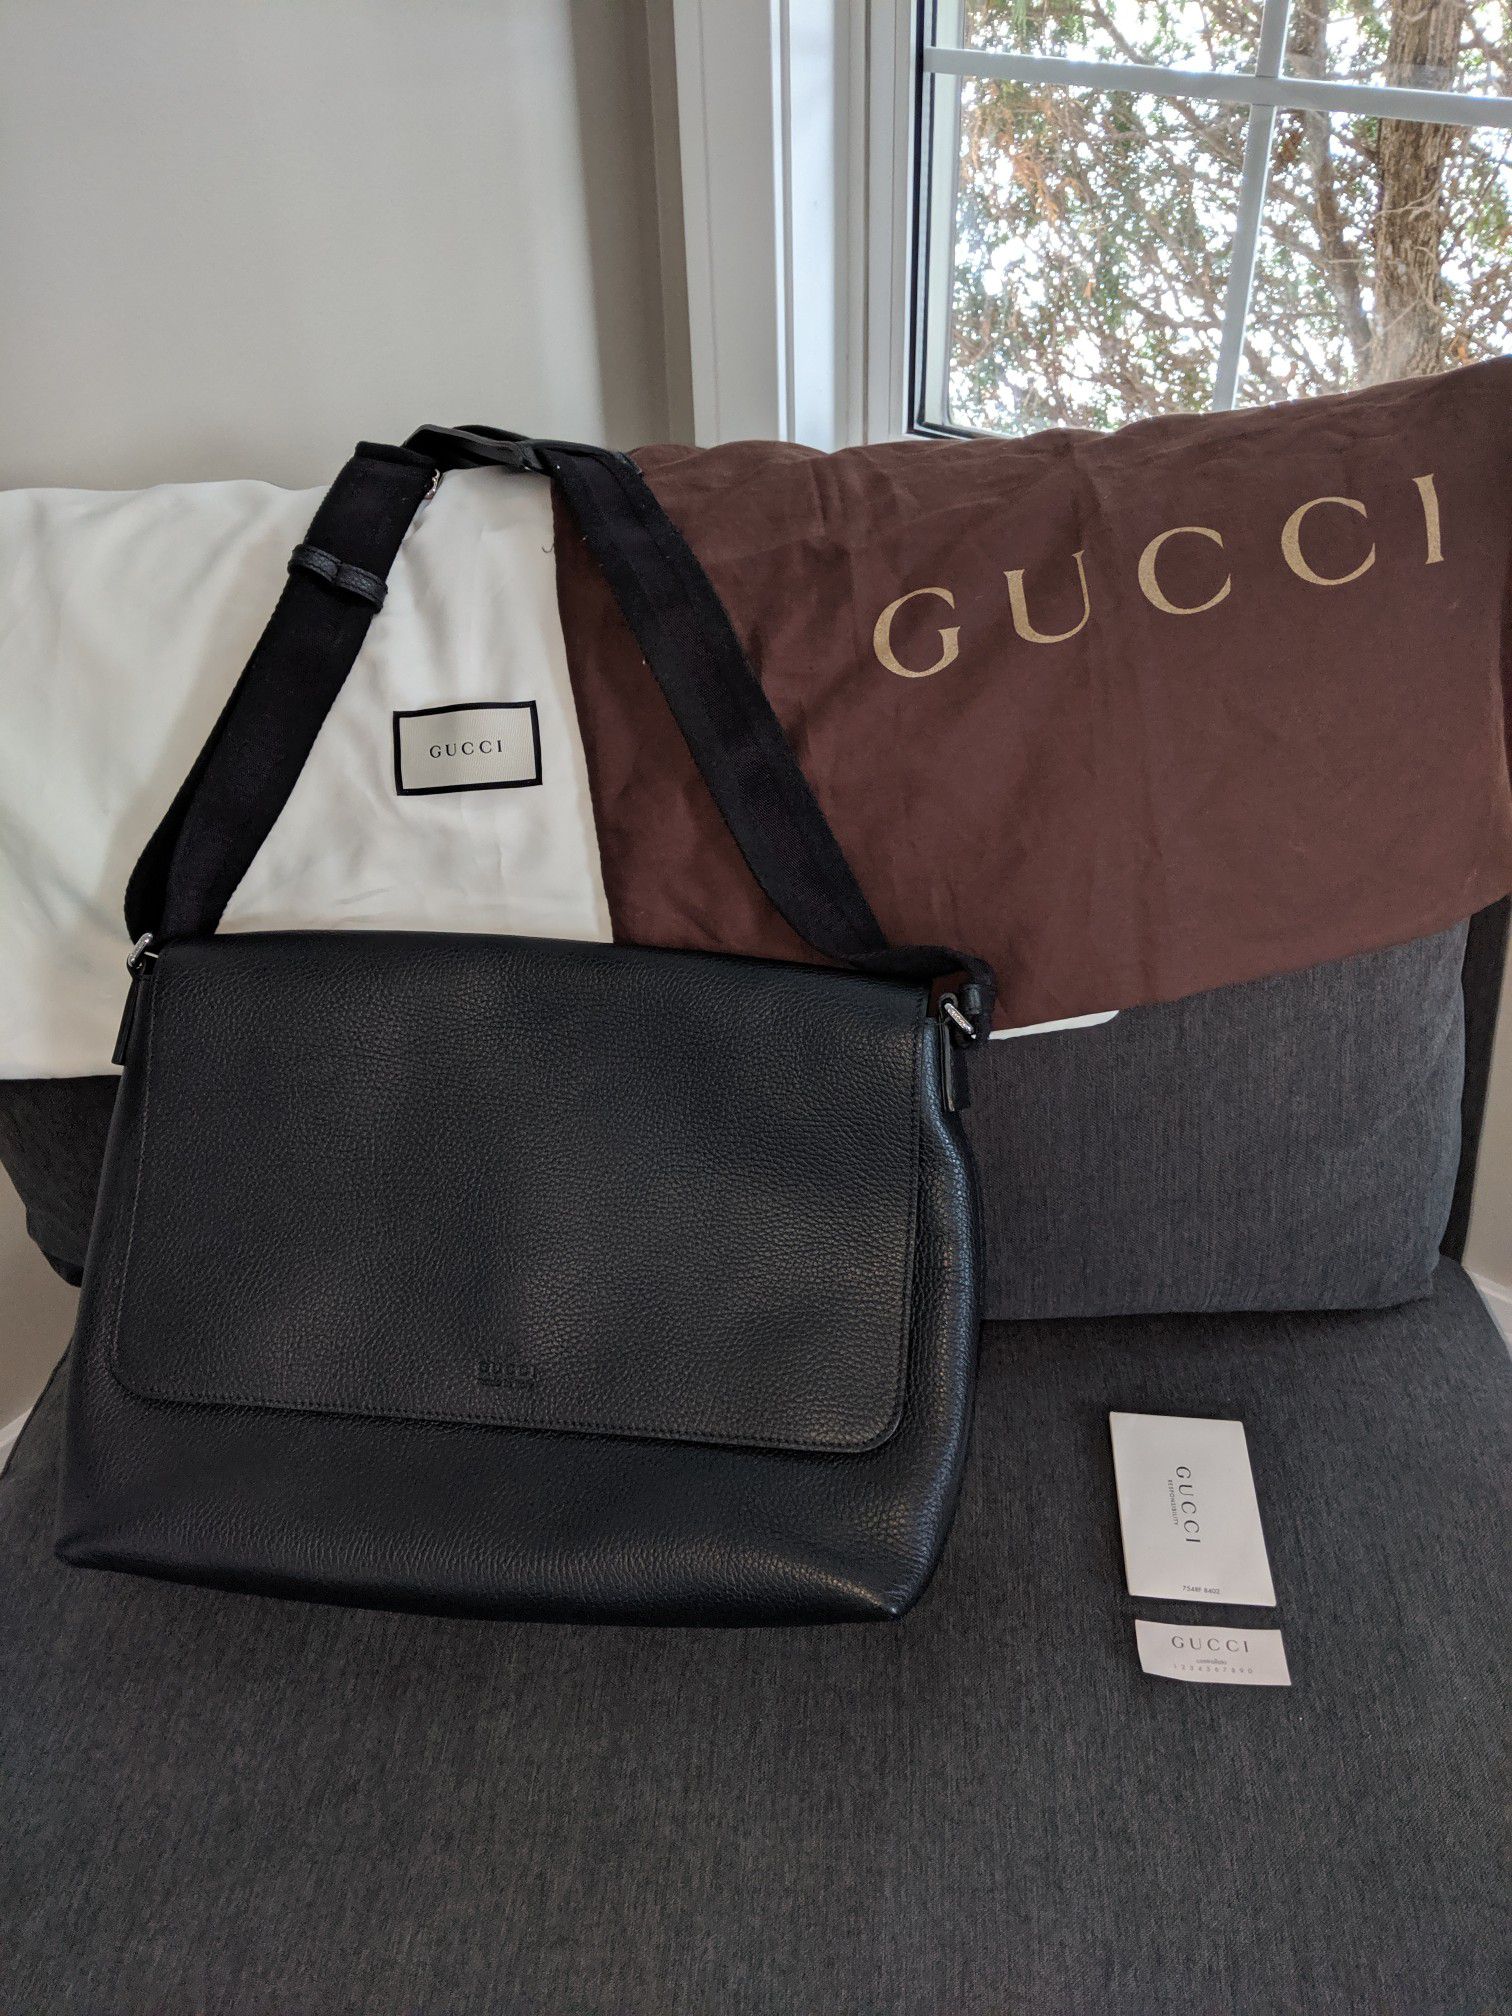 Gucci messenger bag 100% Authentic, receipt, tags, storing bags. Brand new never been used.